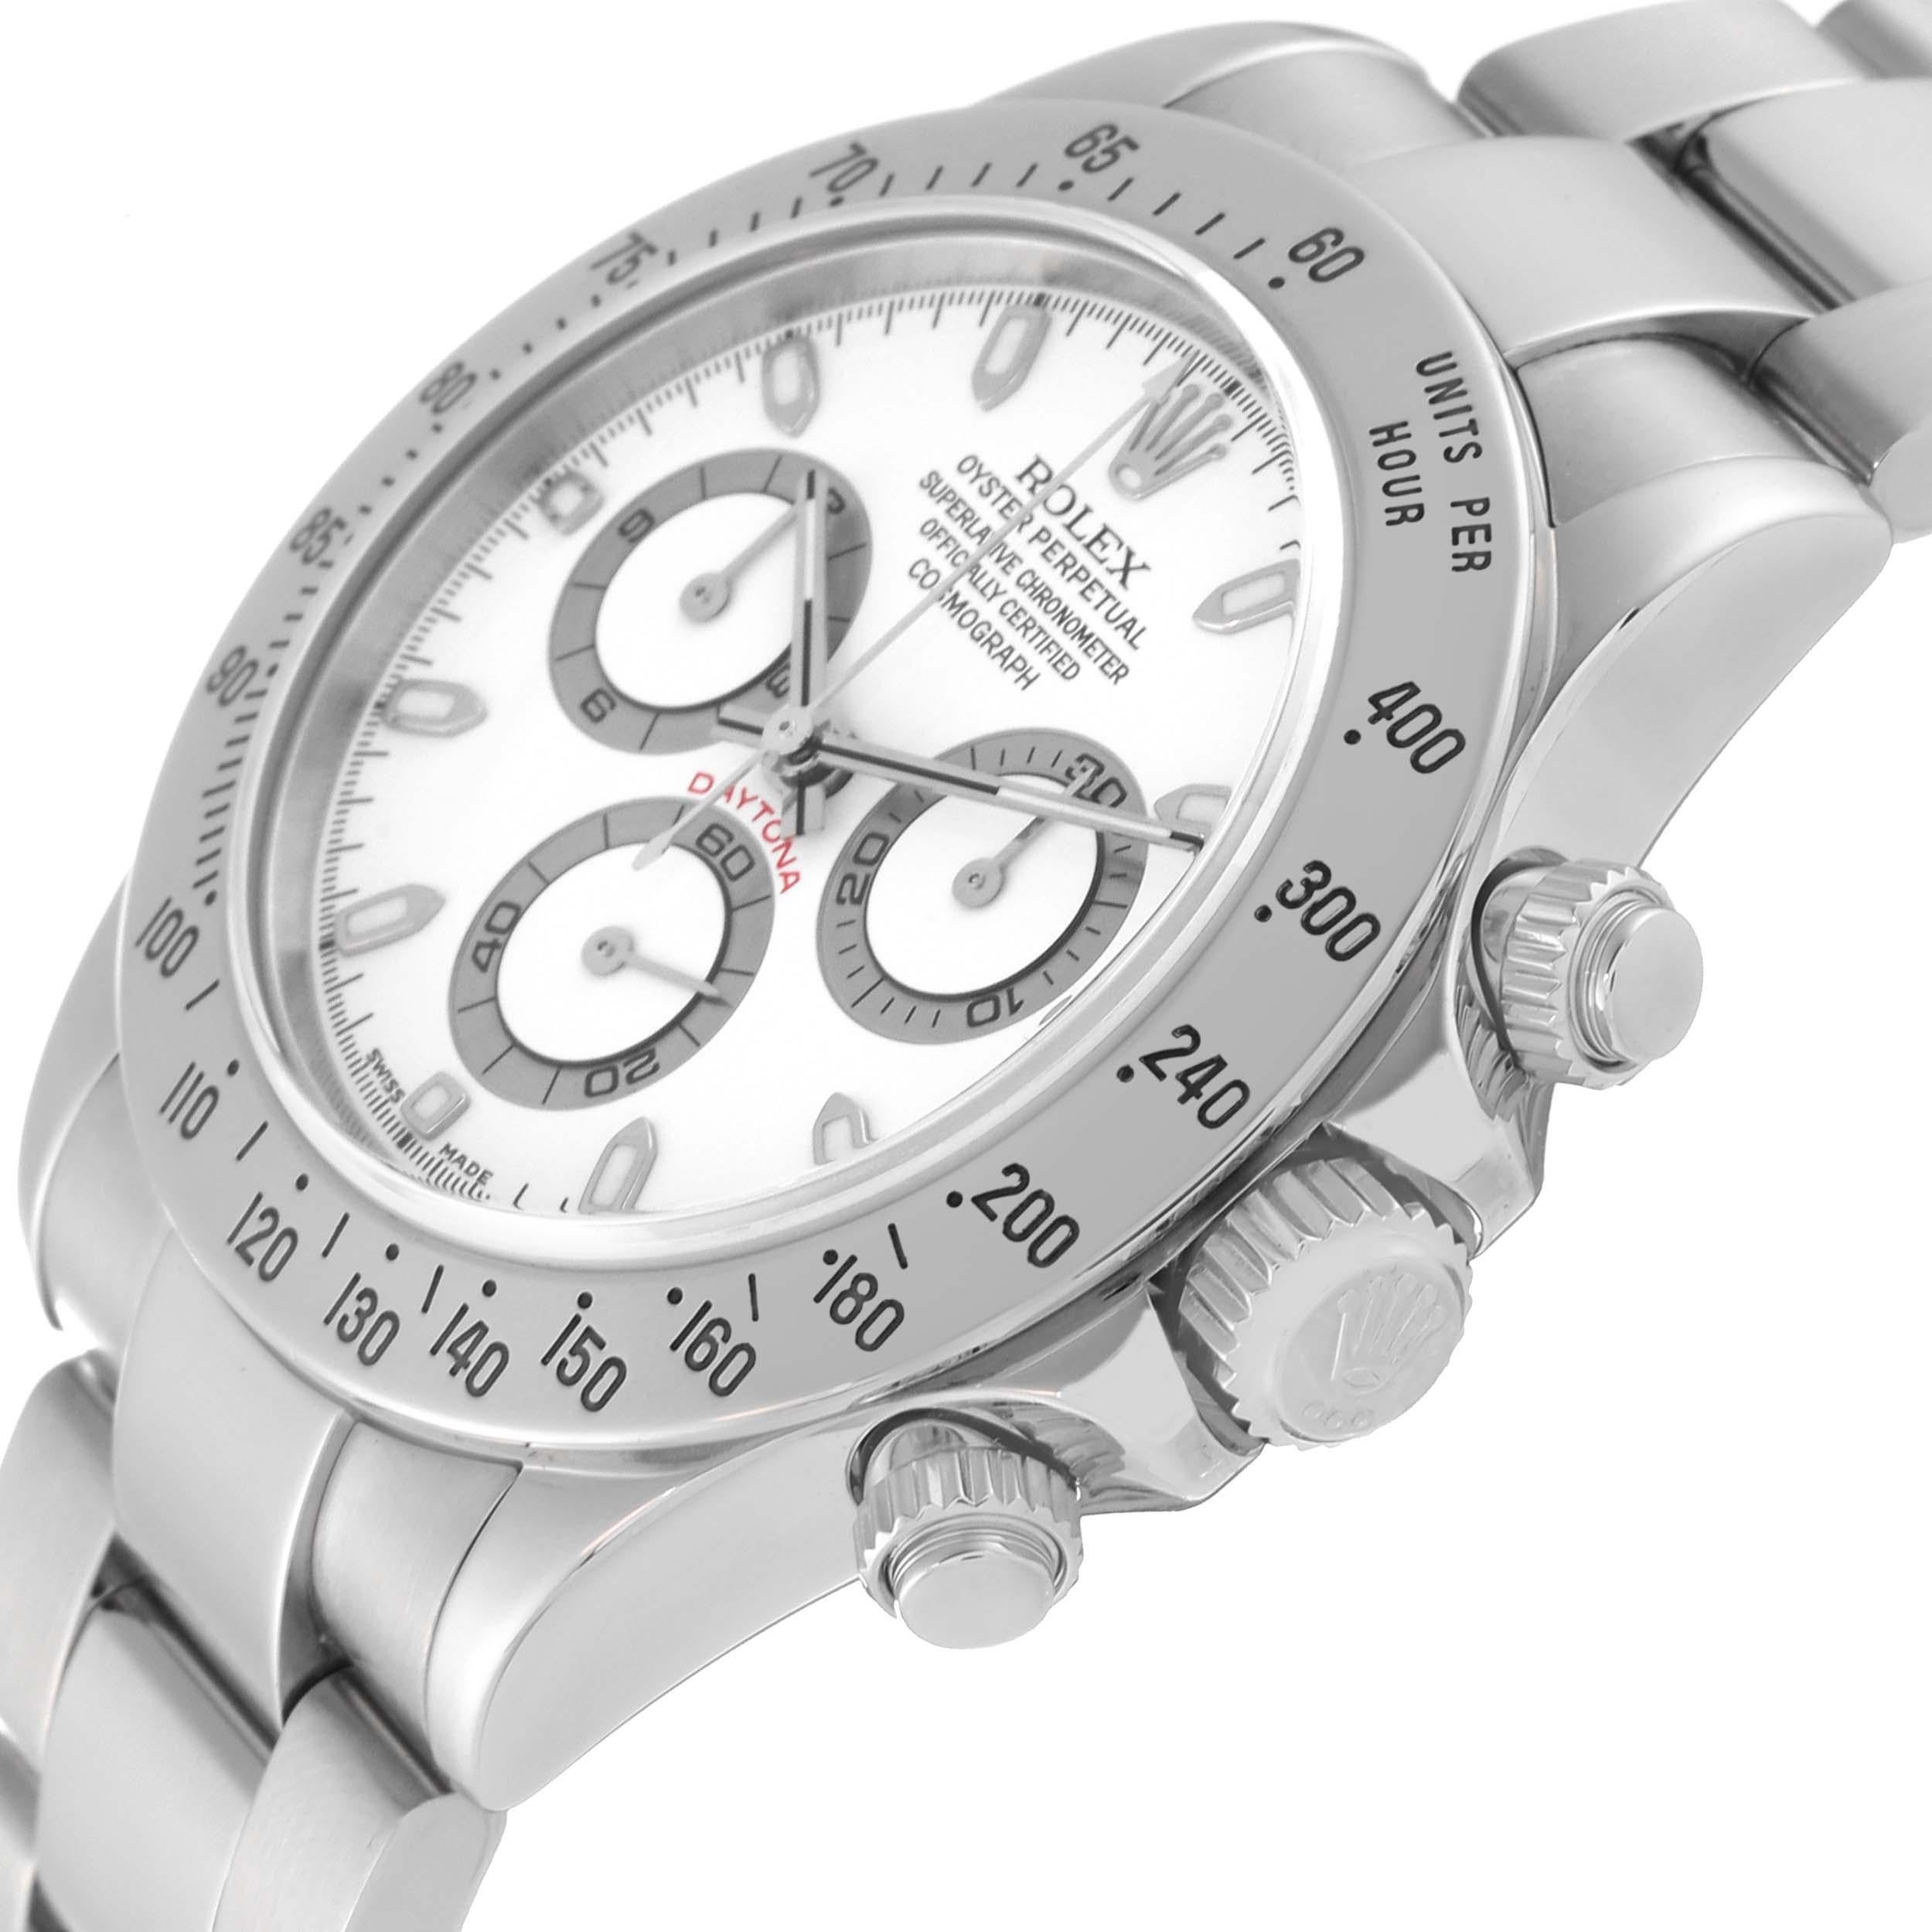 Rolex Daytona White Dial Chronograph Steel Mens Watch 116520 Box Papers For Sale 1